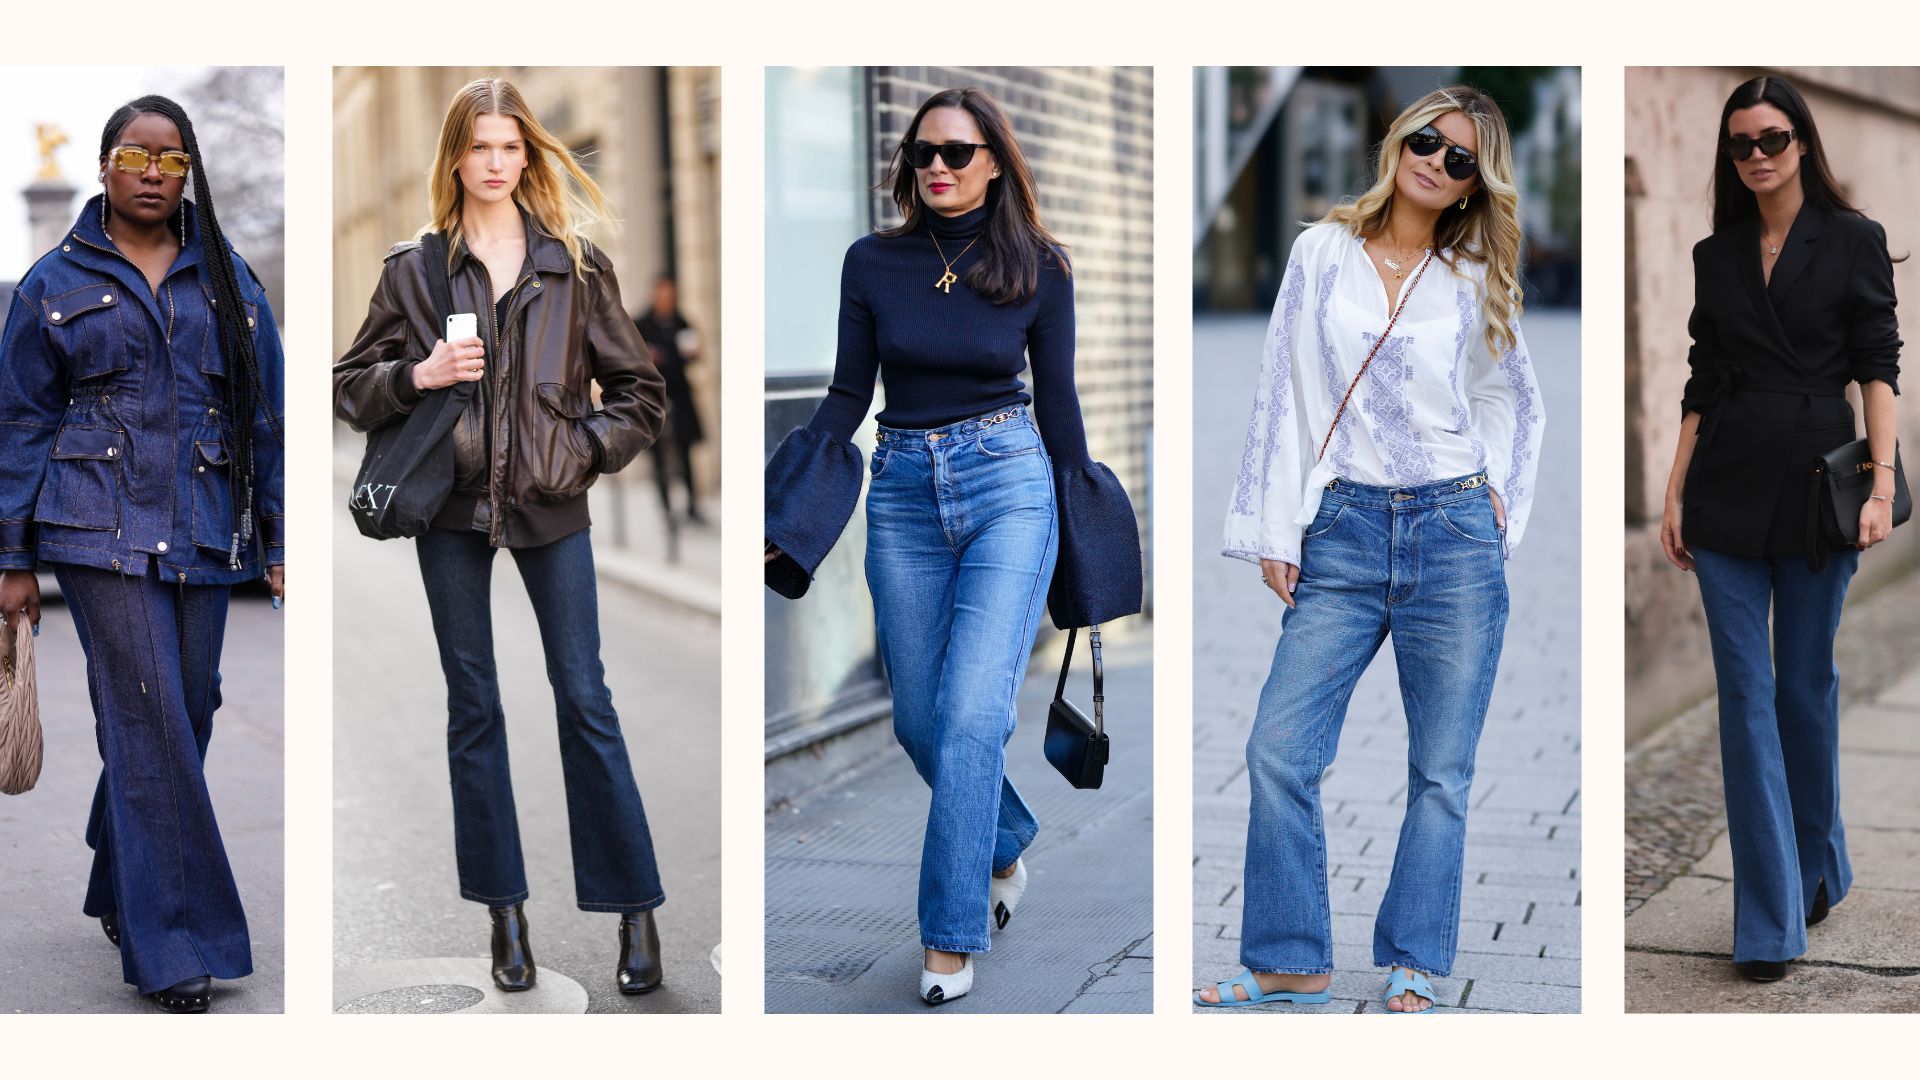 The Best Flared Jeans for Short Legs, Fashion